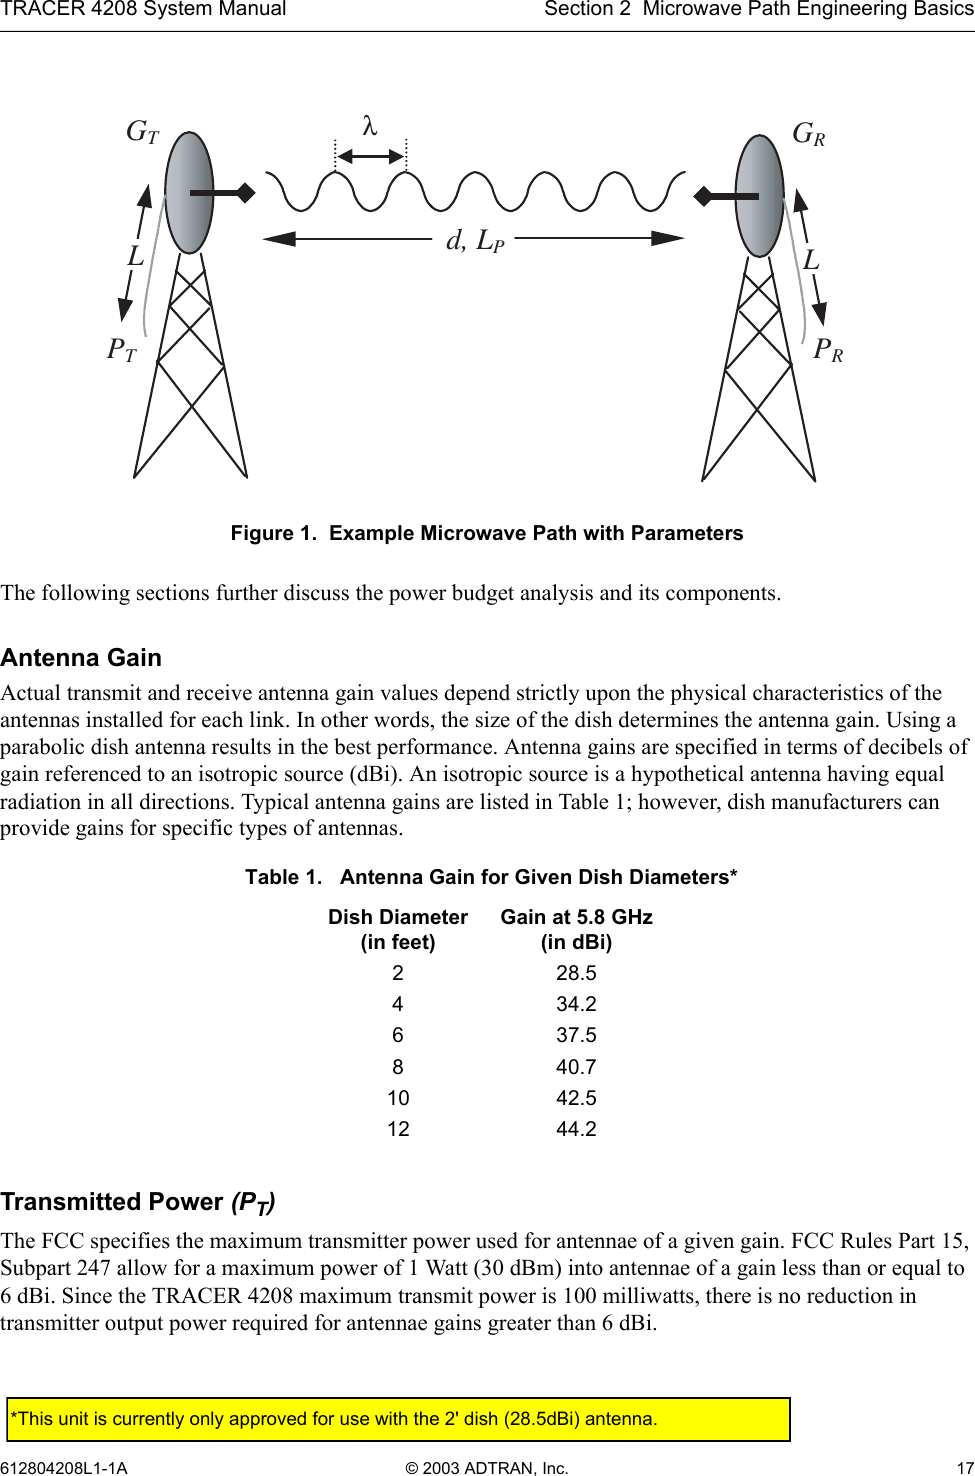 TRACER 4208 System Manual  Section 2  Microwave Path Engineering Basics GT GR d, LP PT PR λ LL Figure 1.  Example Microwave Path with Parameters The following sections further discuss the power budget analysis and its components. Antenna Gain Actual transmit and receive antenna gain values depend strictly upon the physical characteristics of the antennas installed for each link. In other words, the size of the dish determines the antenna gain. Using a parabolic dish antenna results in the best performance. Antenna gains are specified in terms of decibels of gain referenced to an isotropic source (dBi). An isotropic source is a hypothetical antenna having equal radiation in all directions. Typical antenna gains are listed in Table 1; however, dish manufacturers can provide gains for specific types of antennas. Table 1.   Antenna Gain for Given Dish Diameters* Dish Diameter  Gain at 5.8 GHz (in feet)  (in dBi) 2 28.5 4 34.2 6 37.5 8 40.7 10  42.5 12  44.2 Transmitted Power (PT) The FCC specifies the maximum transmitter power used for antennae of a given gain. FCC Rules Part 15, Subpart 247 allow for a maximum power of 1 Watt (30 dBm) into antennae of a gain less than or equal to 6 dBi. Since the TRACER 4208 maximum transmit power is 100 milliwatts, there is no reduction in transmitter output power required for antennae gains greater than 6 dBi. 612804208L1-1A  © 2003 ADTRAN, Inc.  17 *This unit is currently only approved for use with the 2&apos; dish (28.5dBi) antenna. 